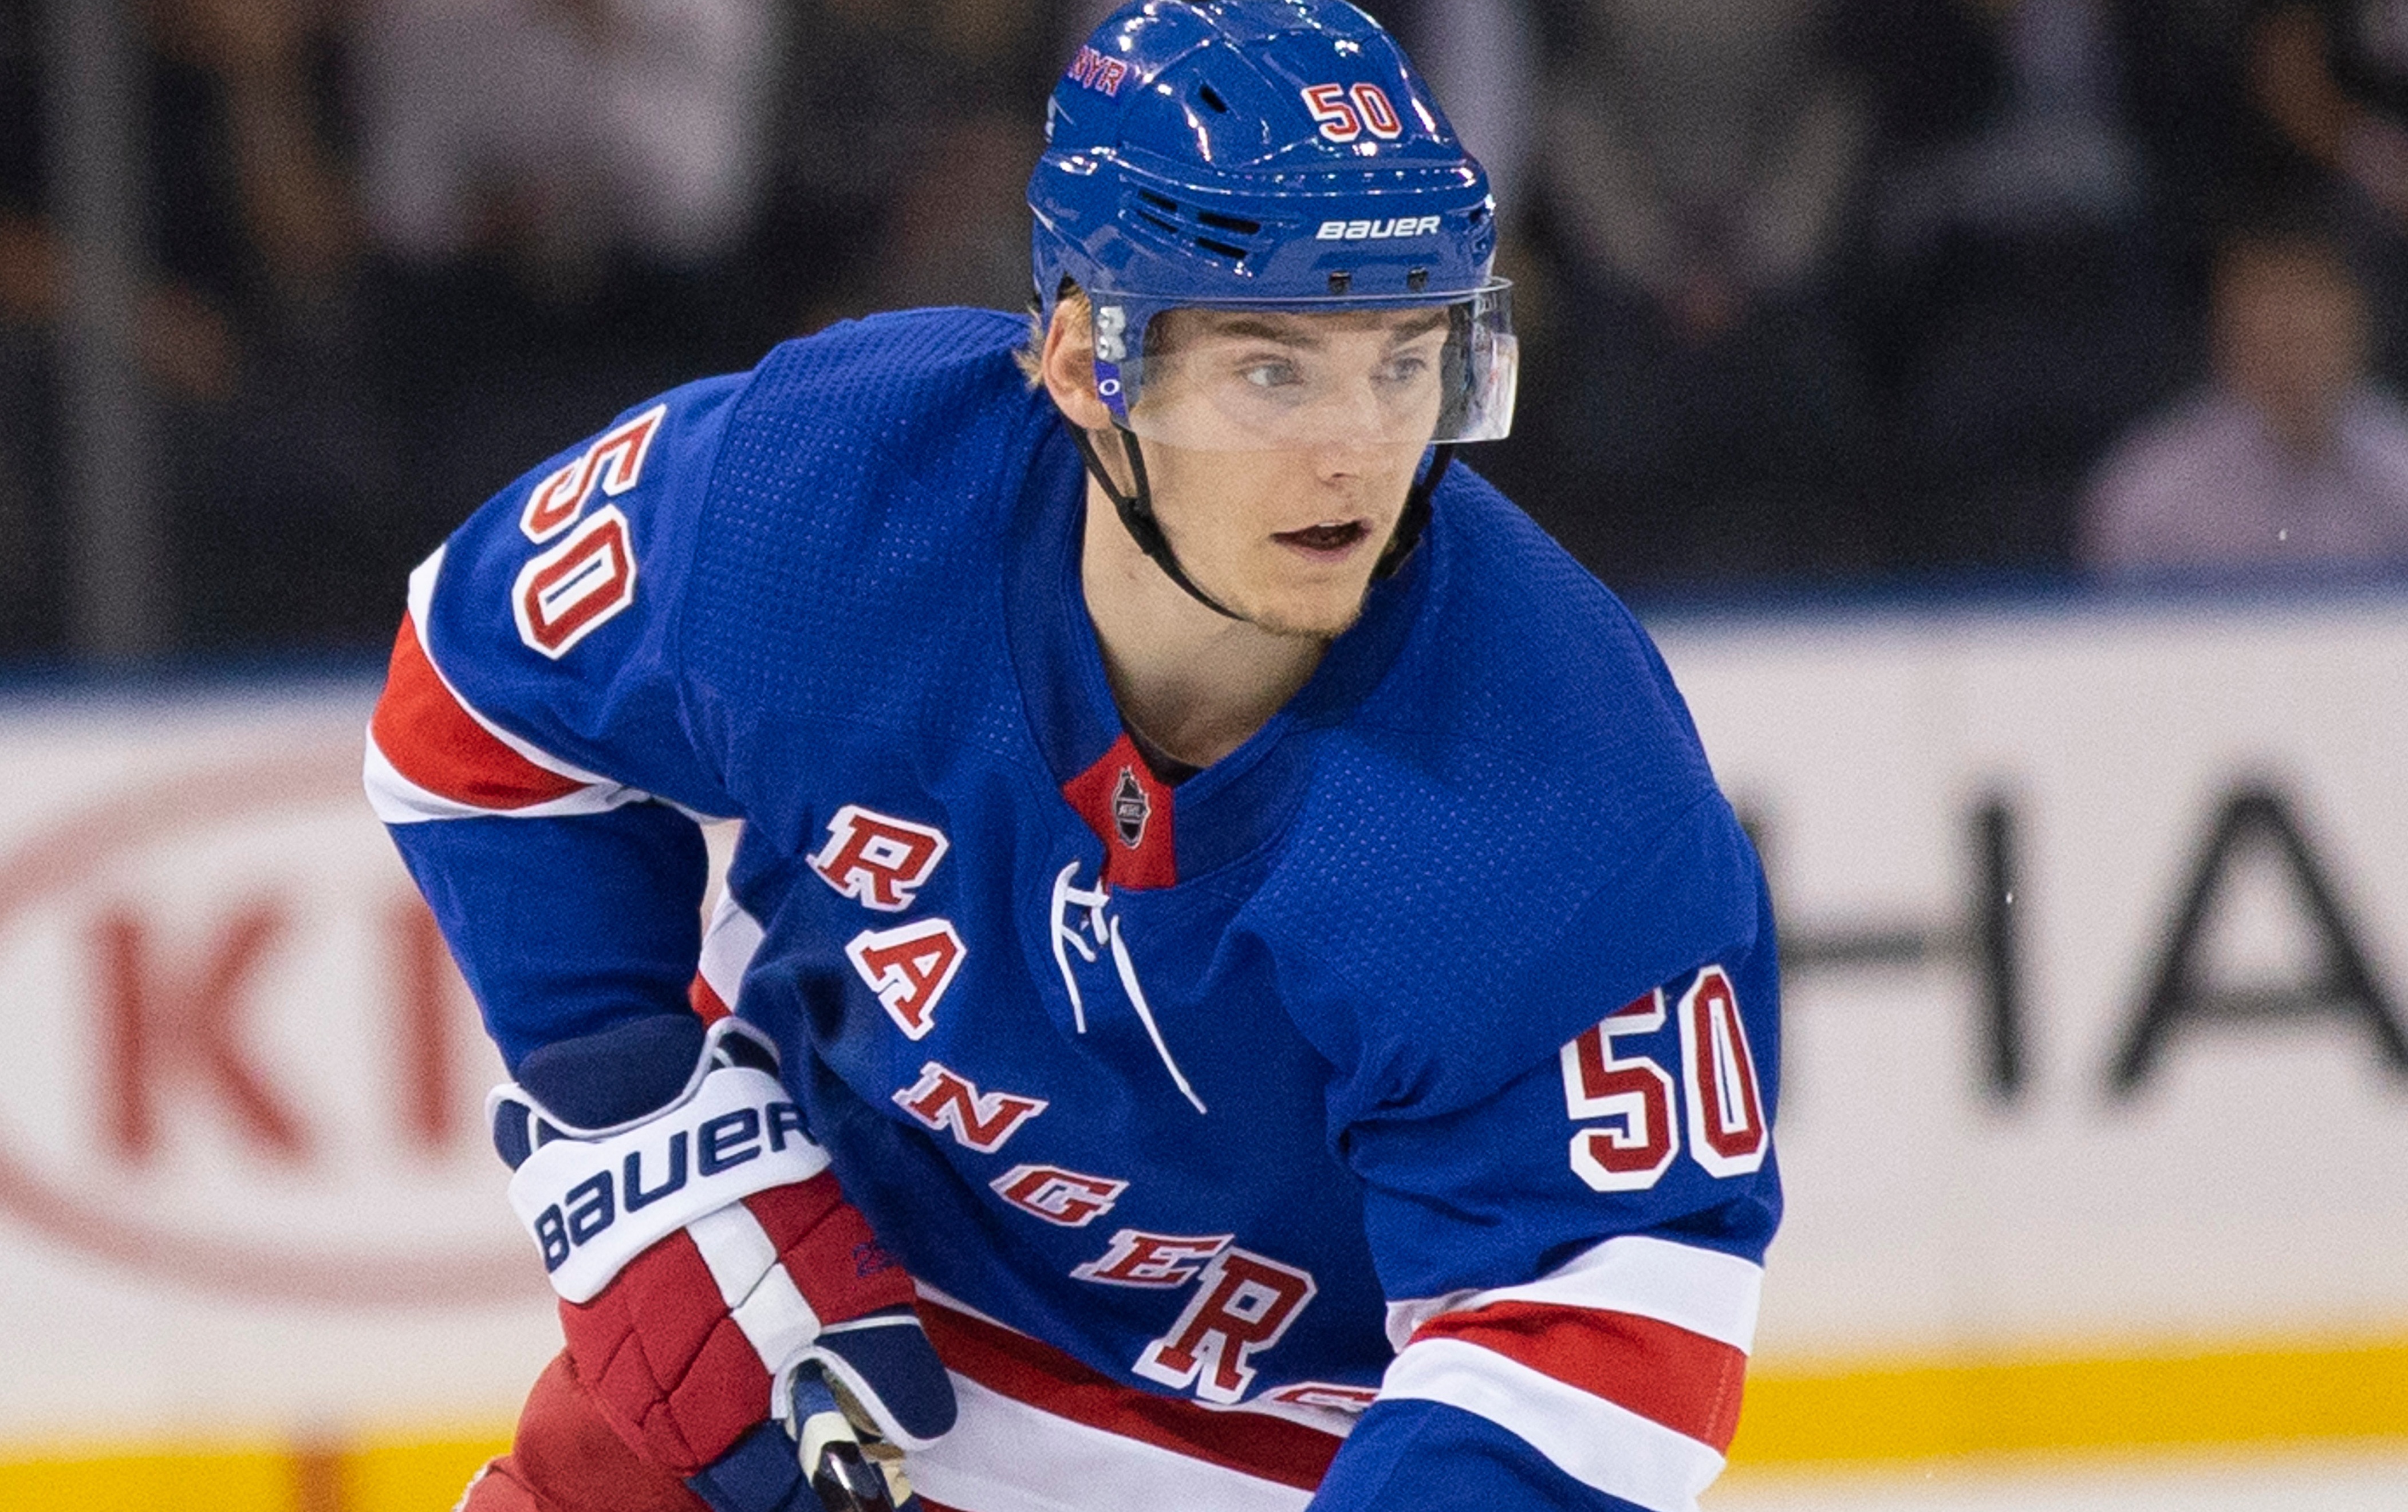 Lias Andersson NHL "data-caption =" Lias Andersson, center forward of the New York Rangers. "Data-source =" @ hives.news